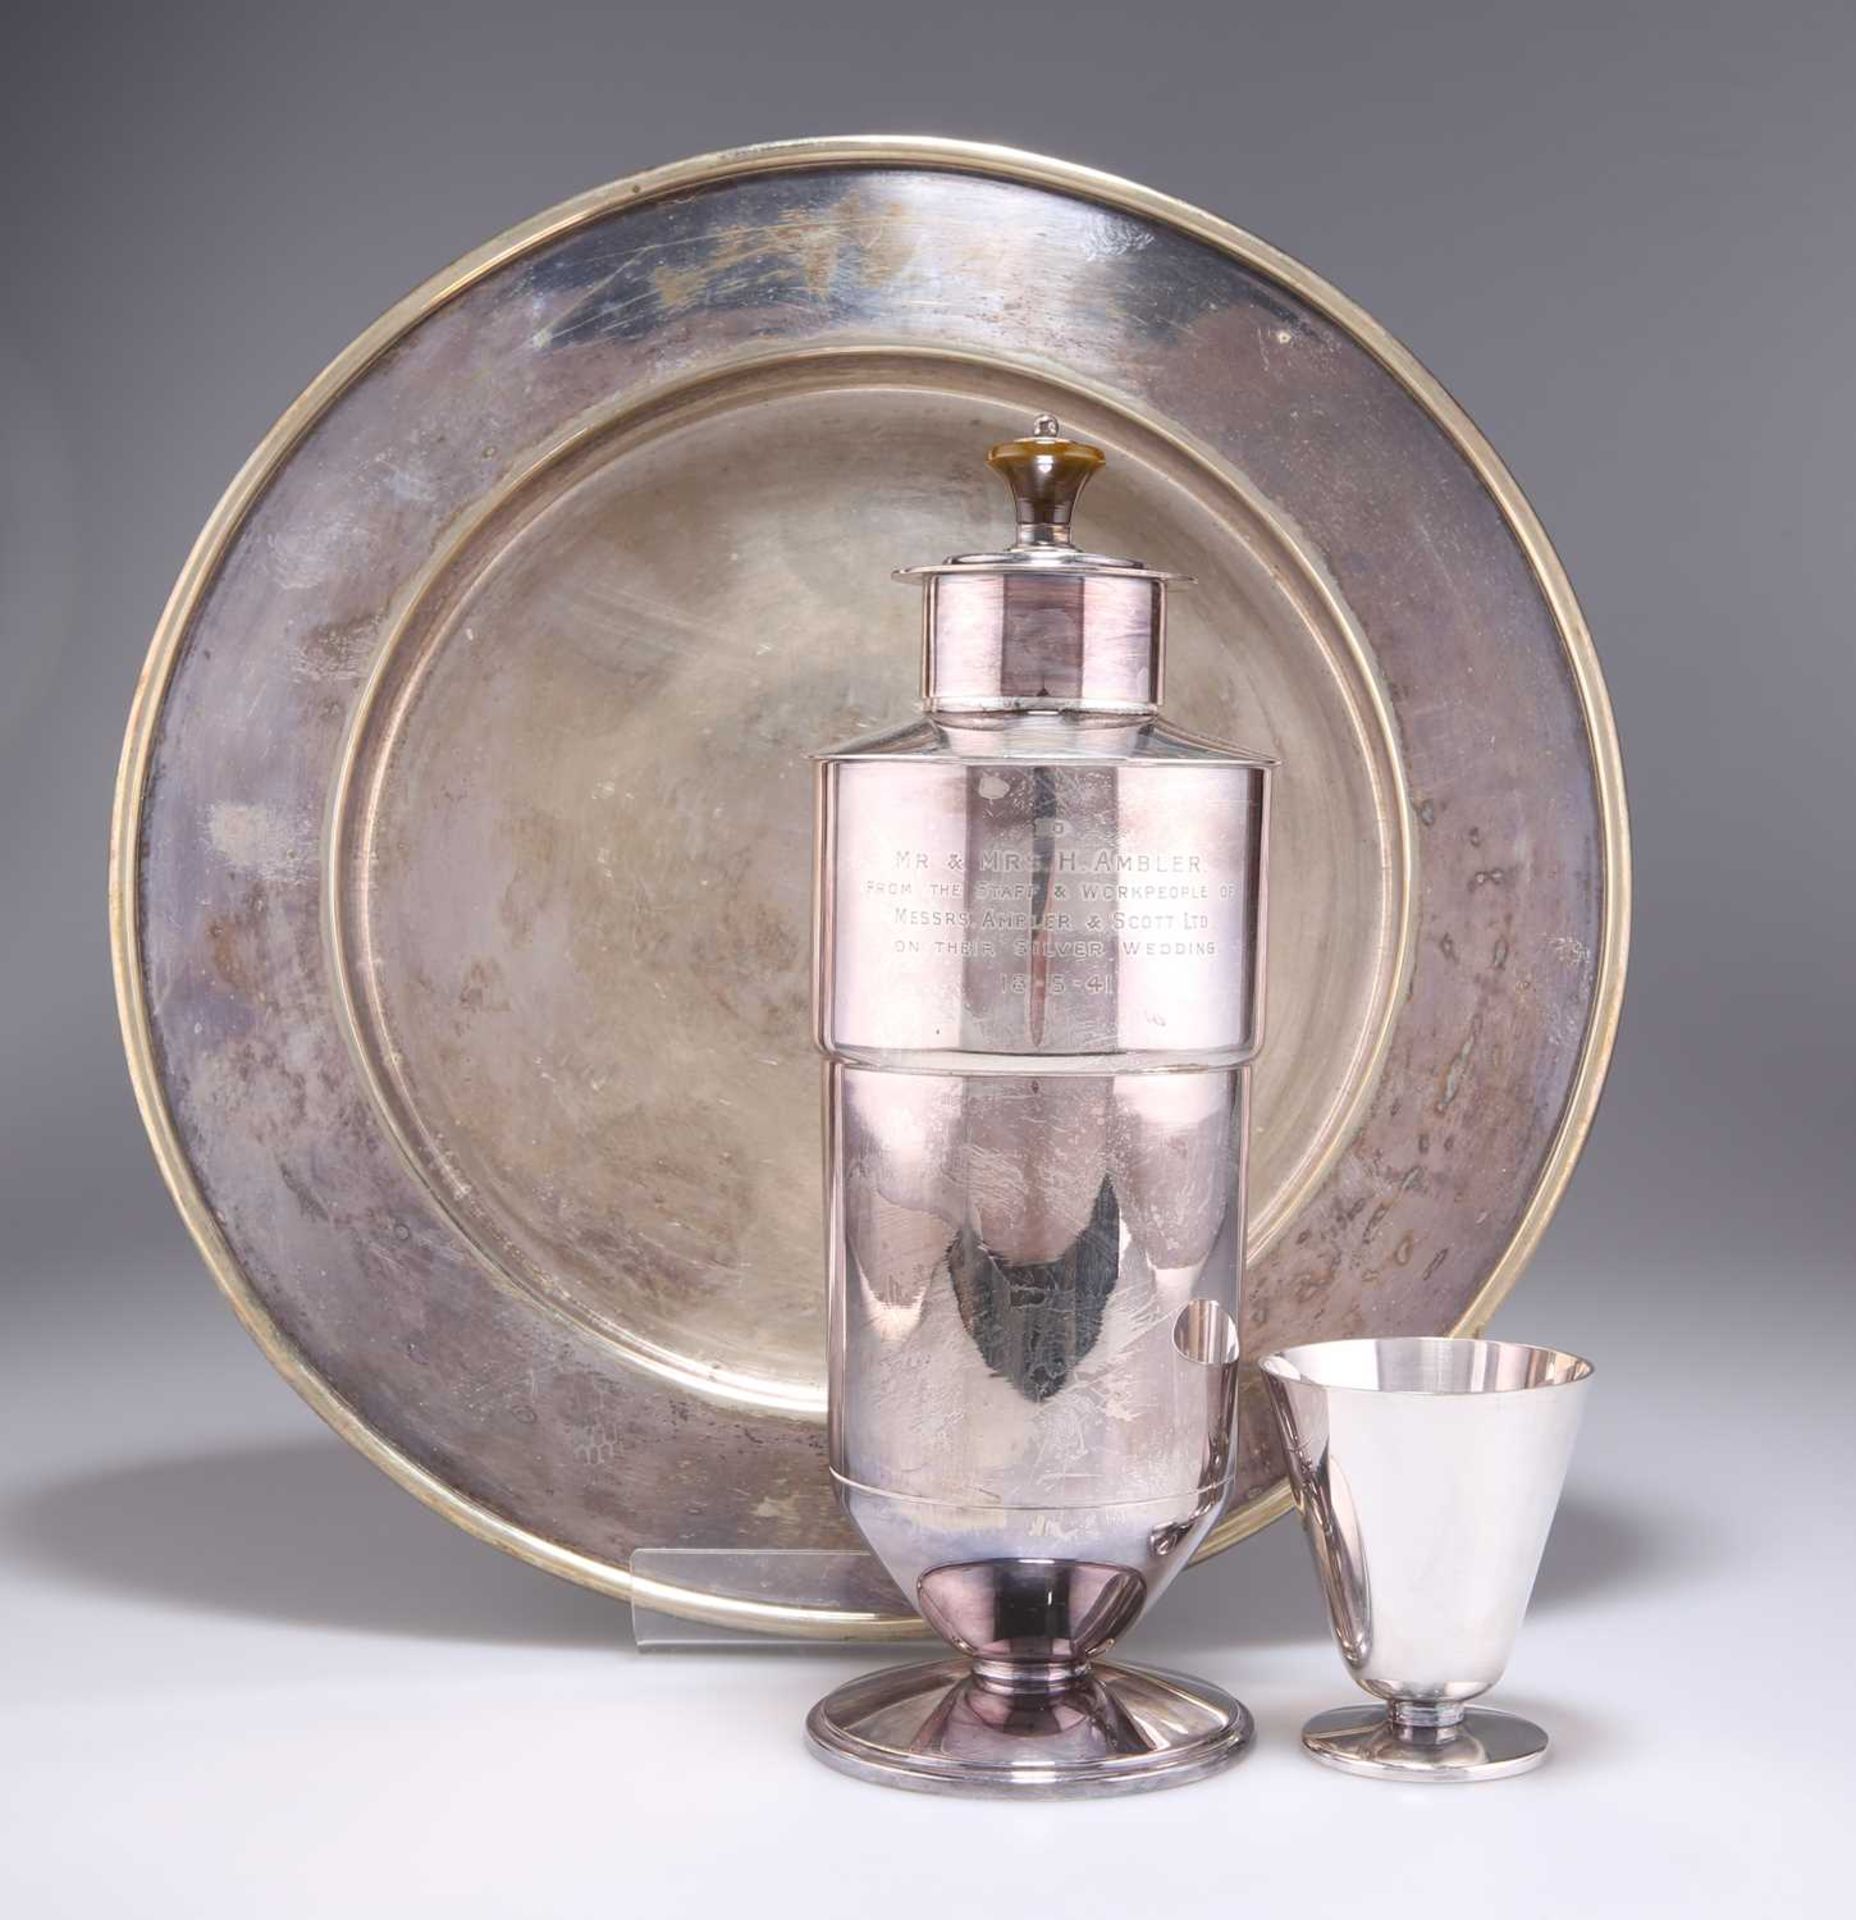 A SILVER-PLATED COCKTAIL SET, EARLY 20TH CENTURY - Image 3 of 4